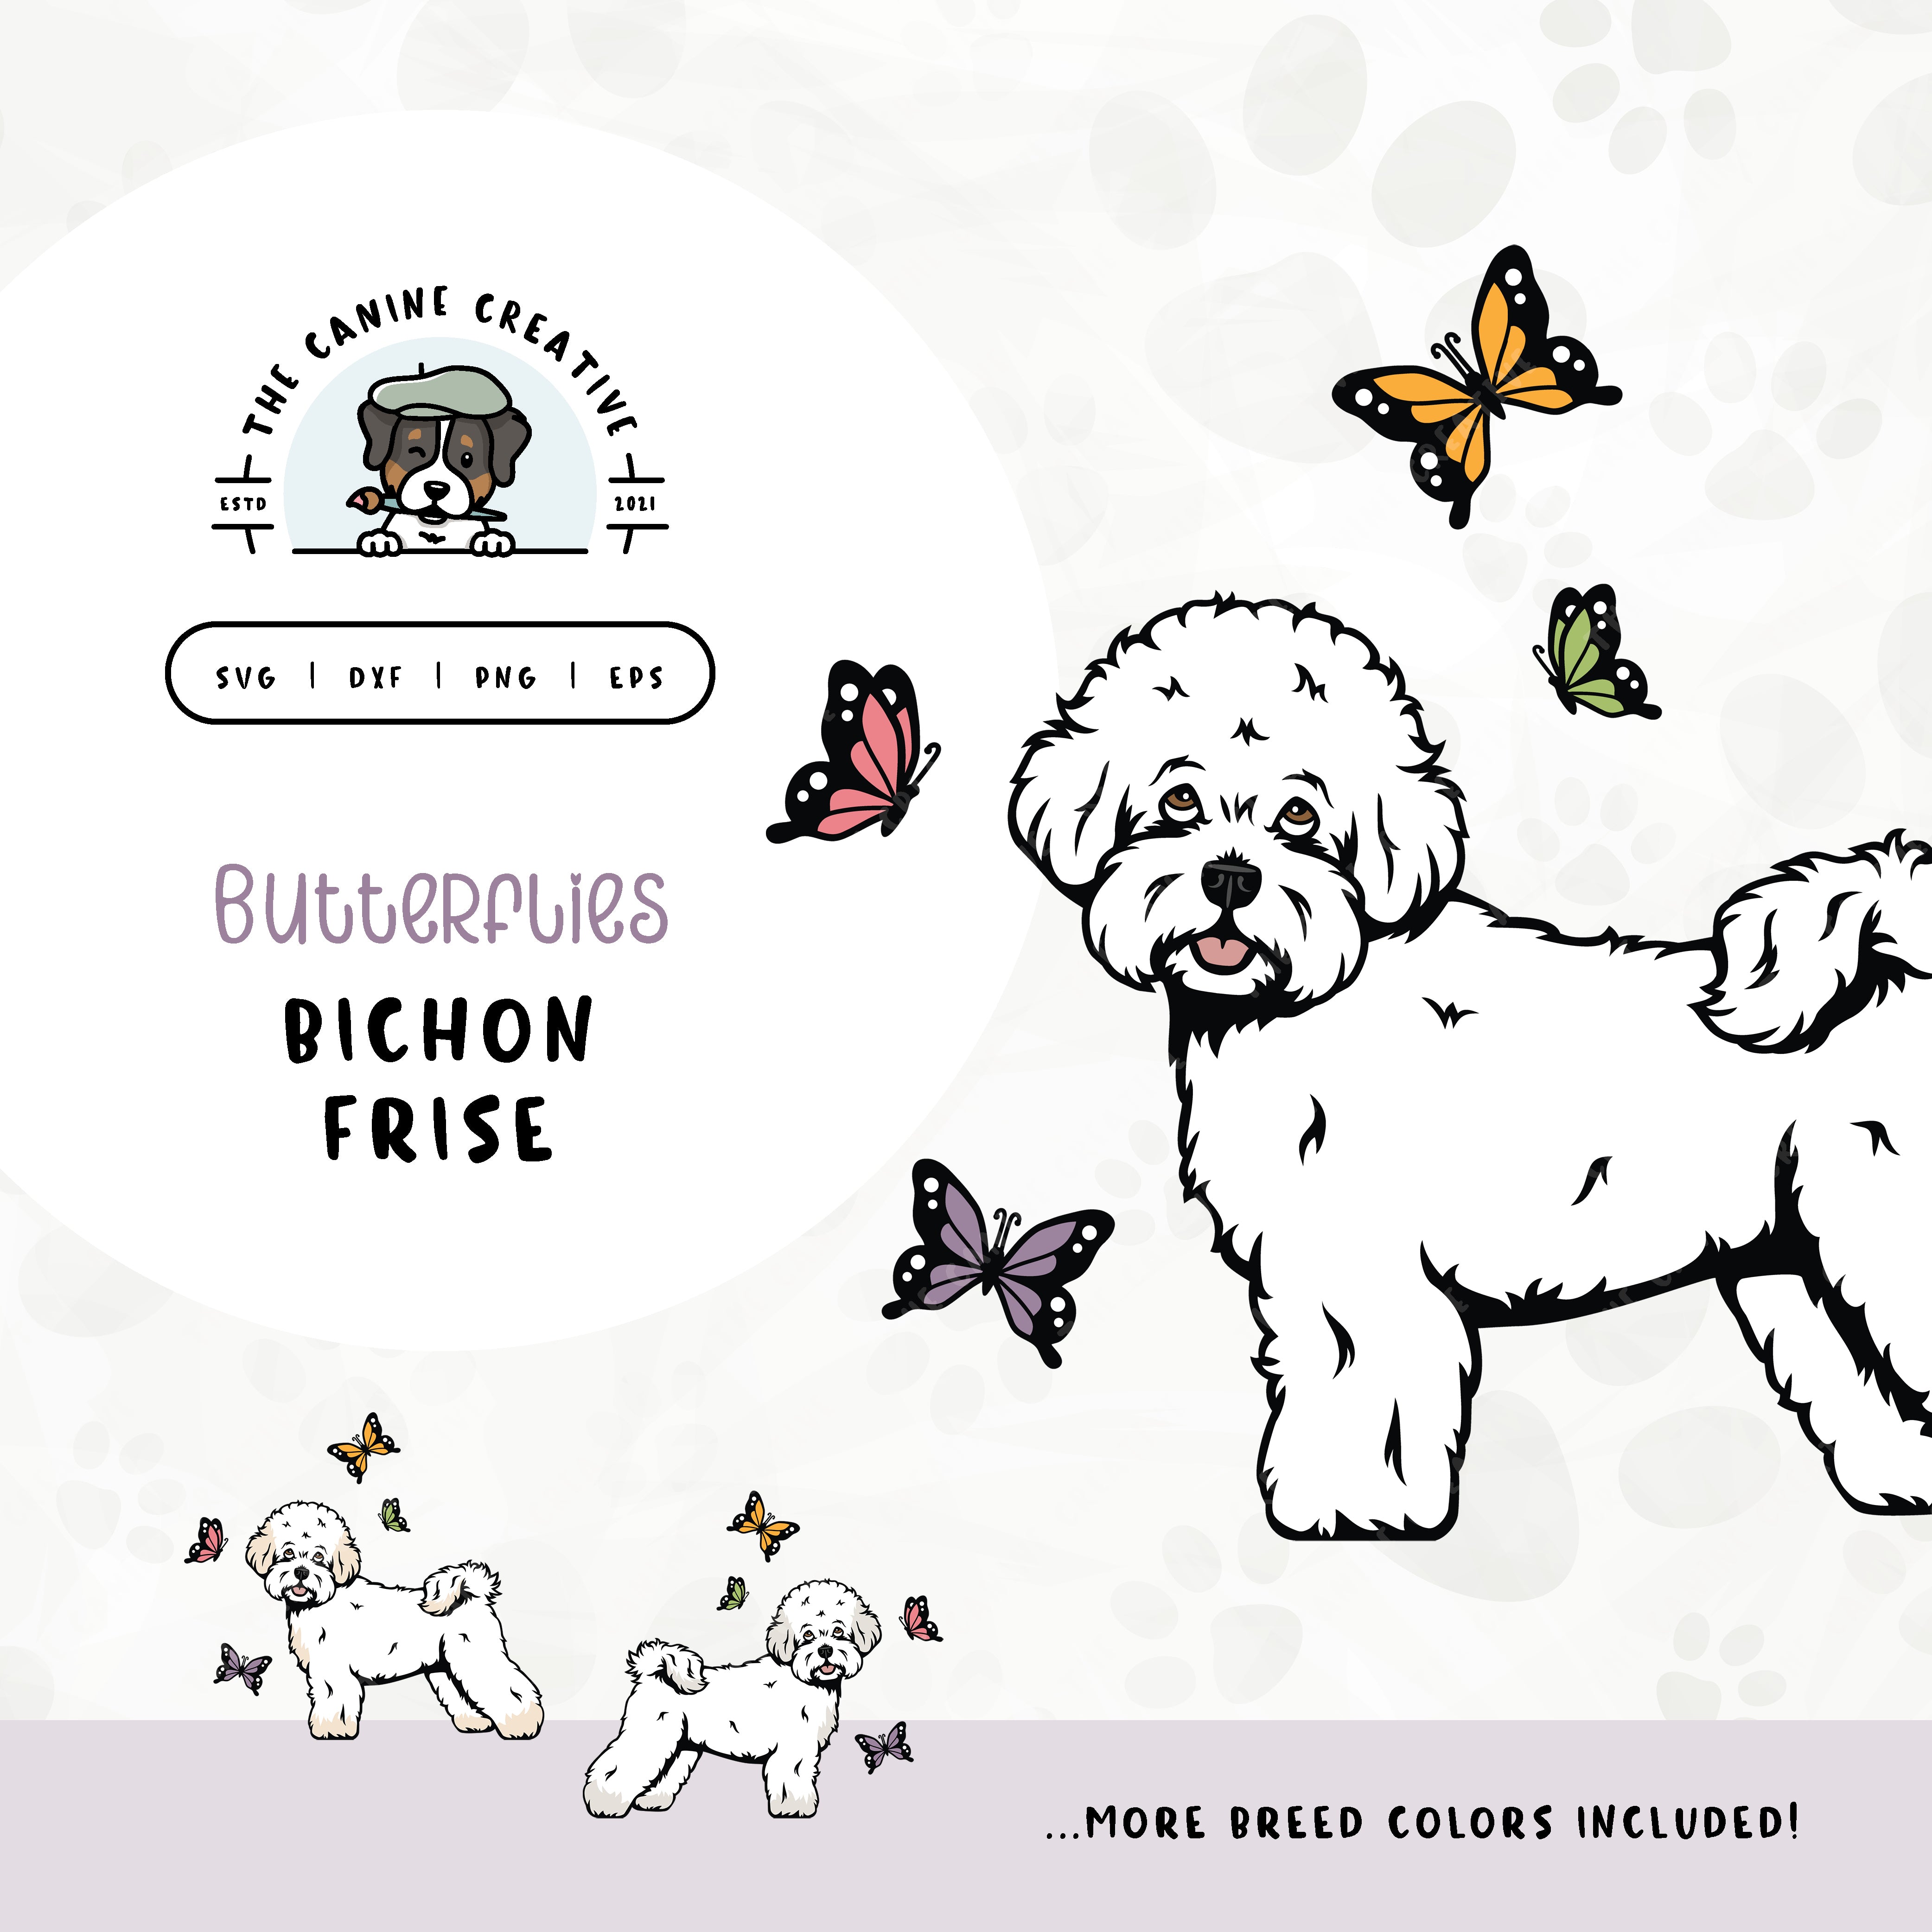 This springtime illustration features a Bichon Frise among colorful butterflies. File formats include: SVG, DXF, PNG, and EPS.